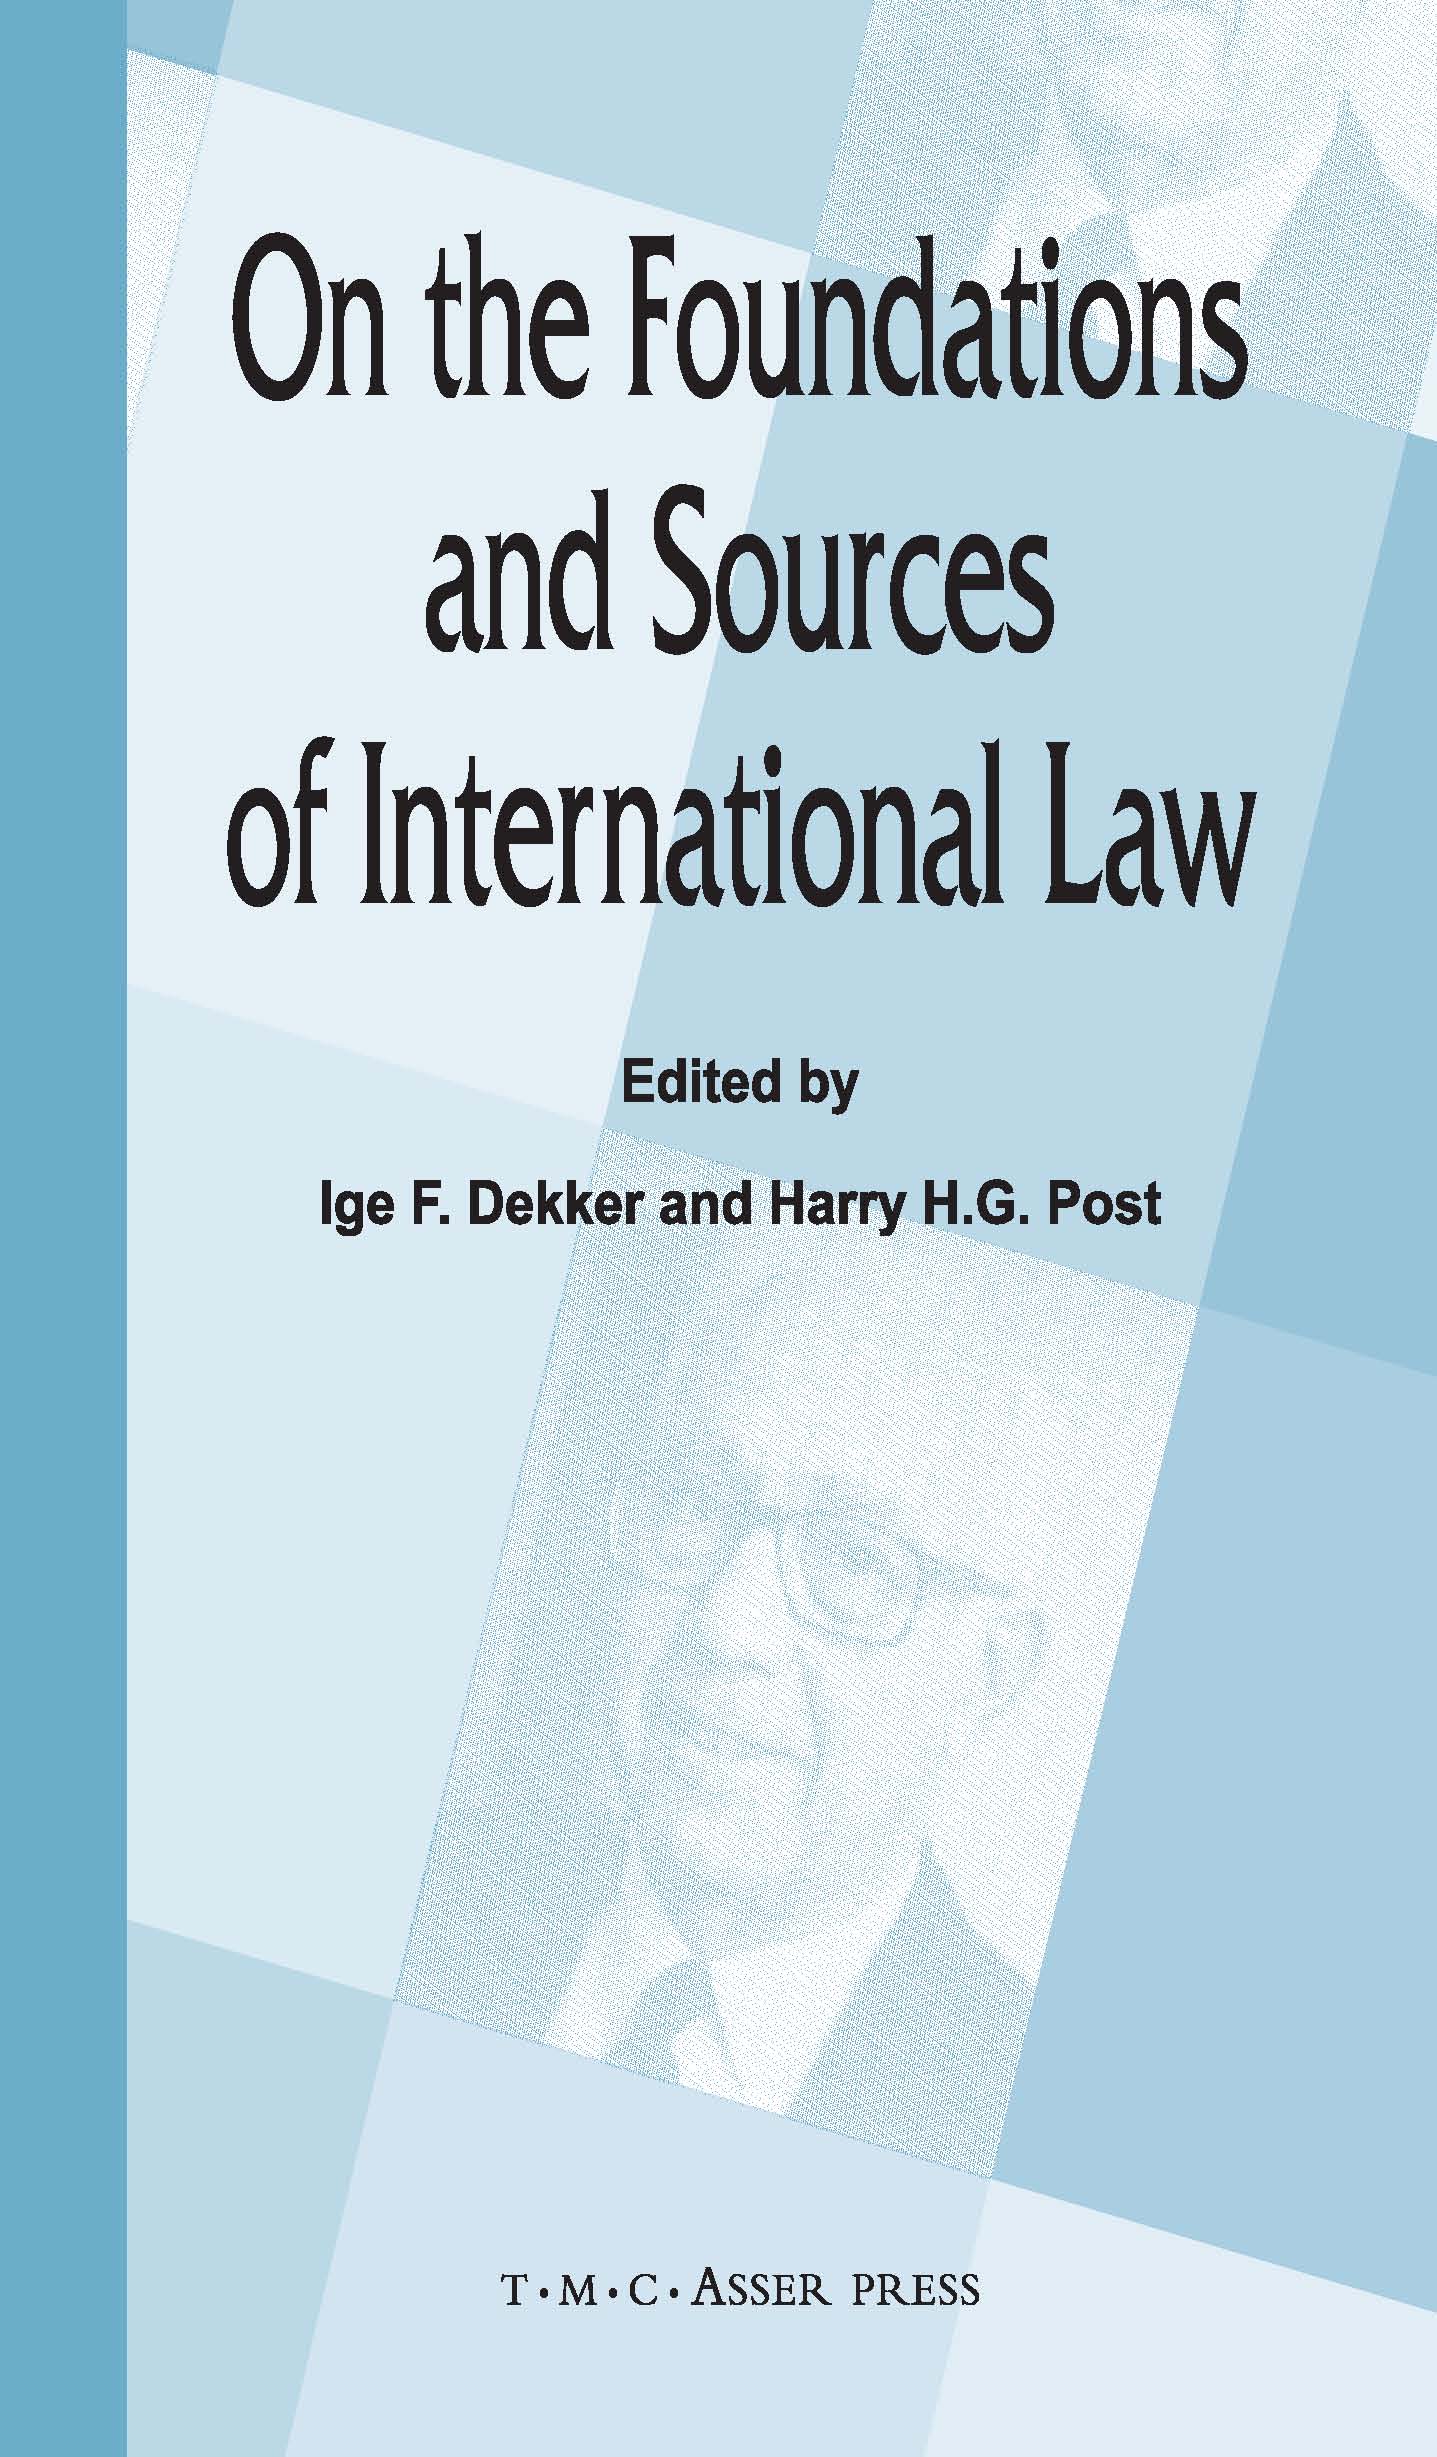 On the Foundations and Sources of International Law